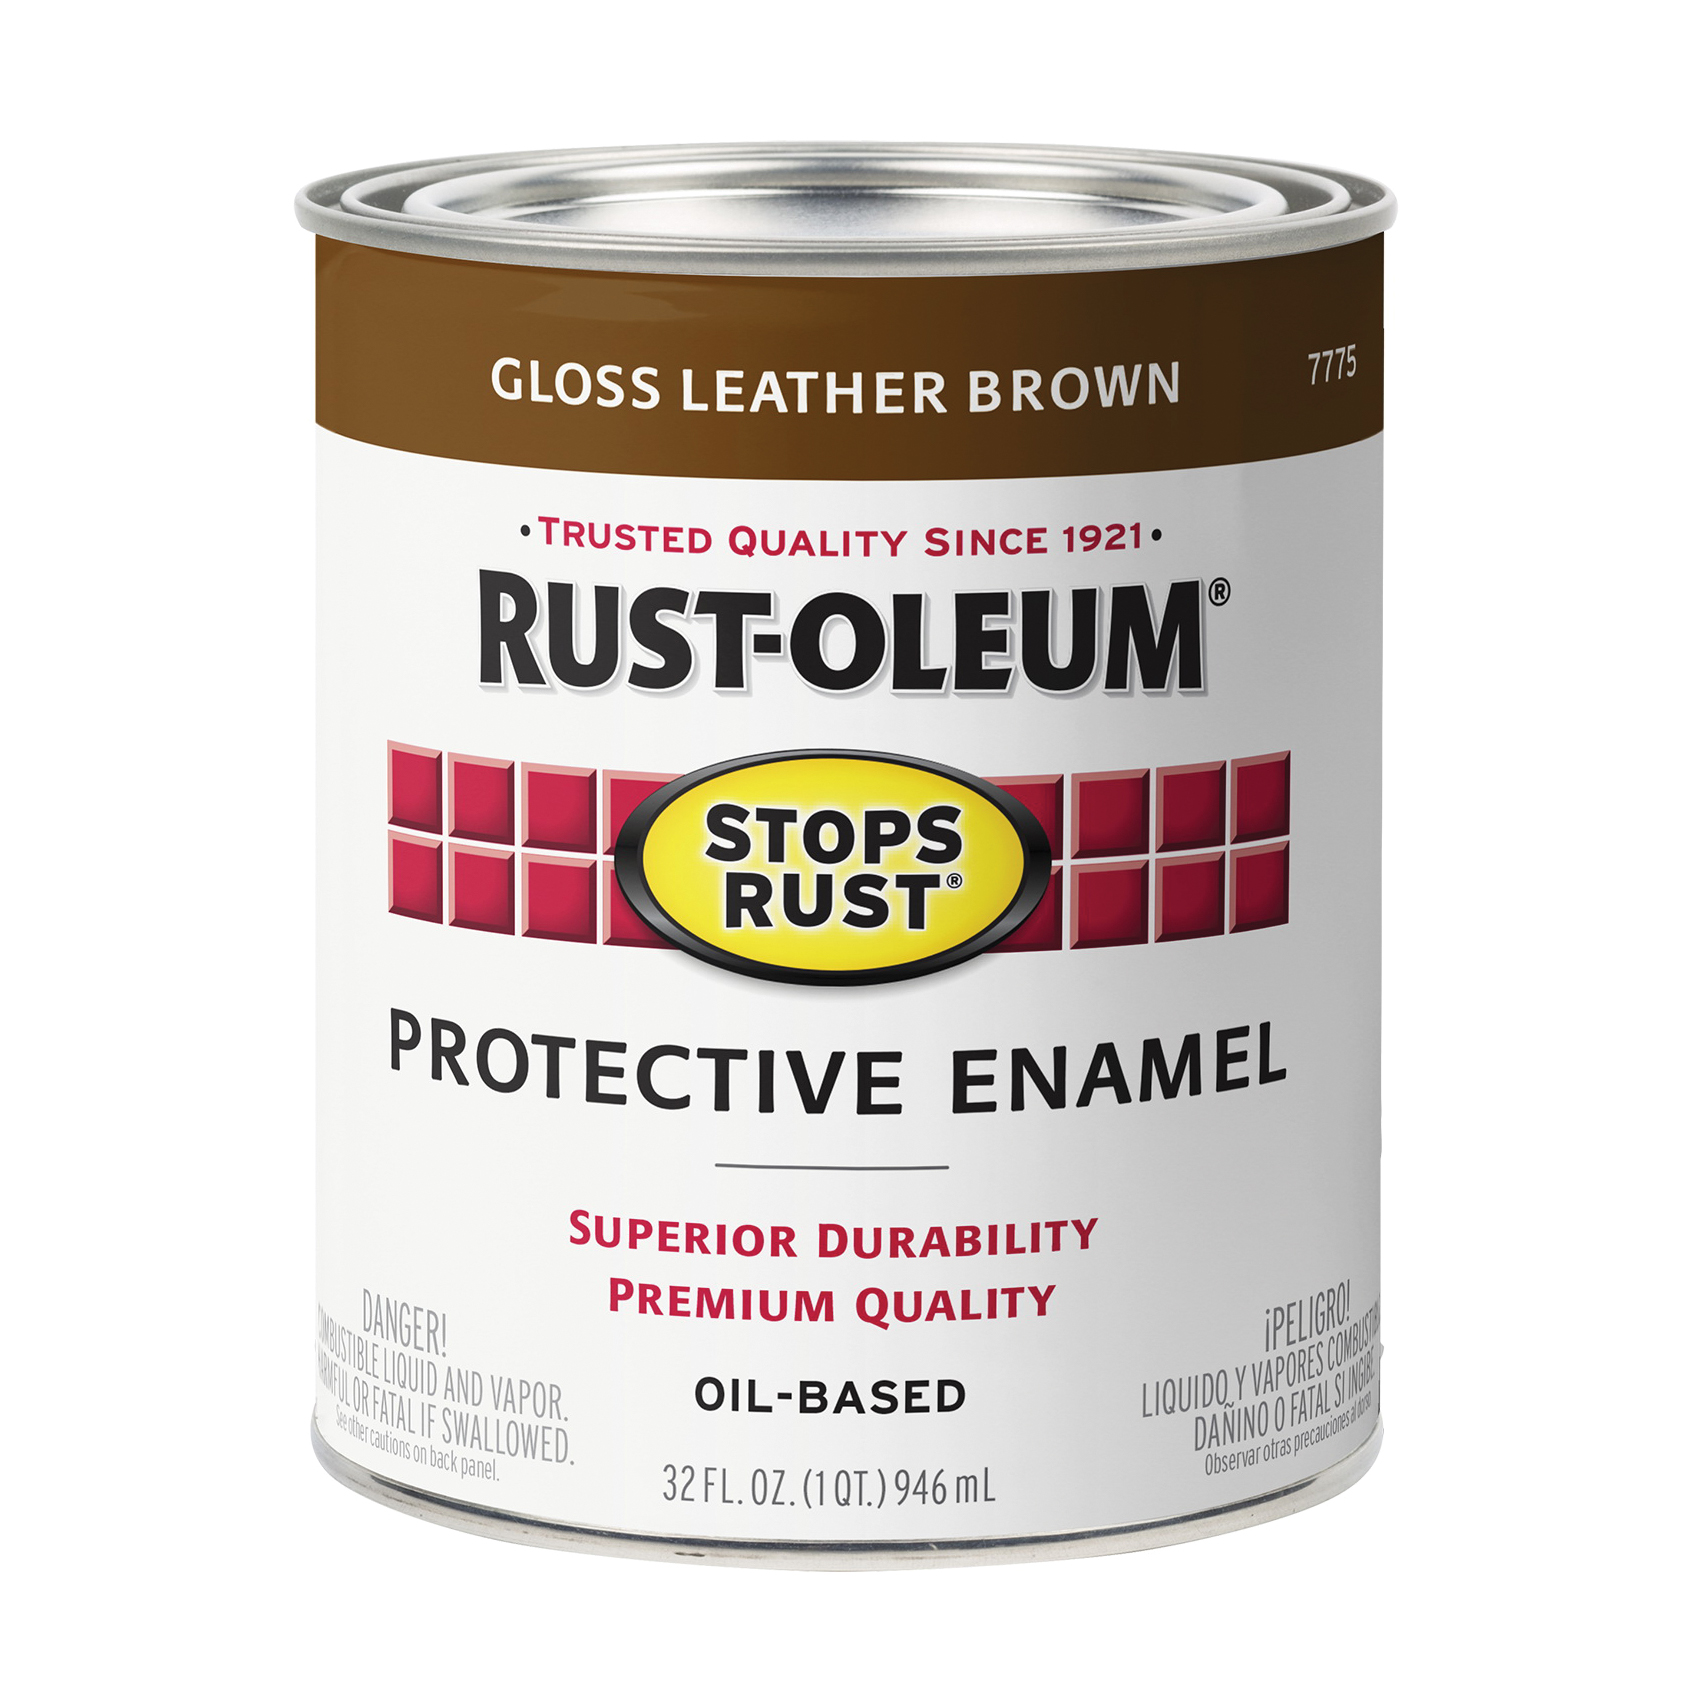 Stops Rust 7775502 Enamel Paint, Oil, Gloss, Leather Brown, 1 qt, Can, 50 to 90 sq-ft/qt Coverage Area